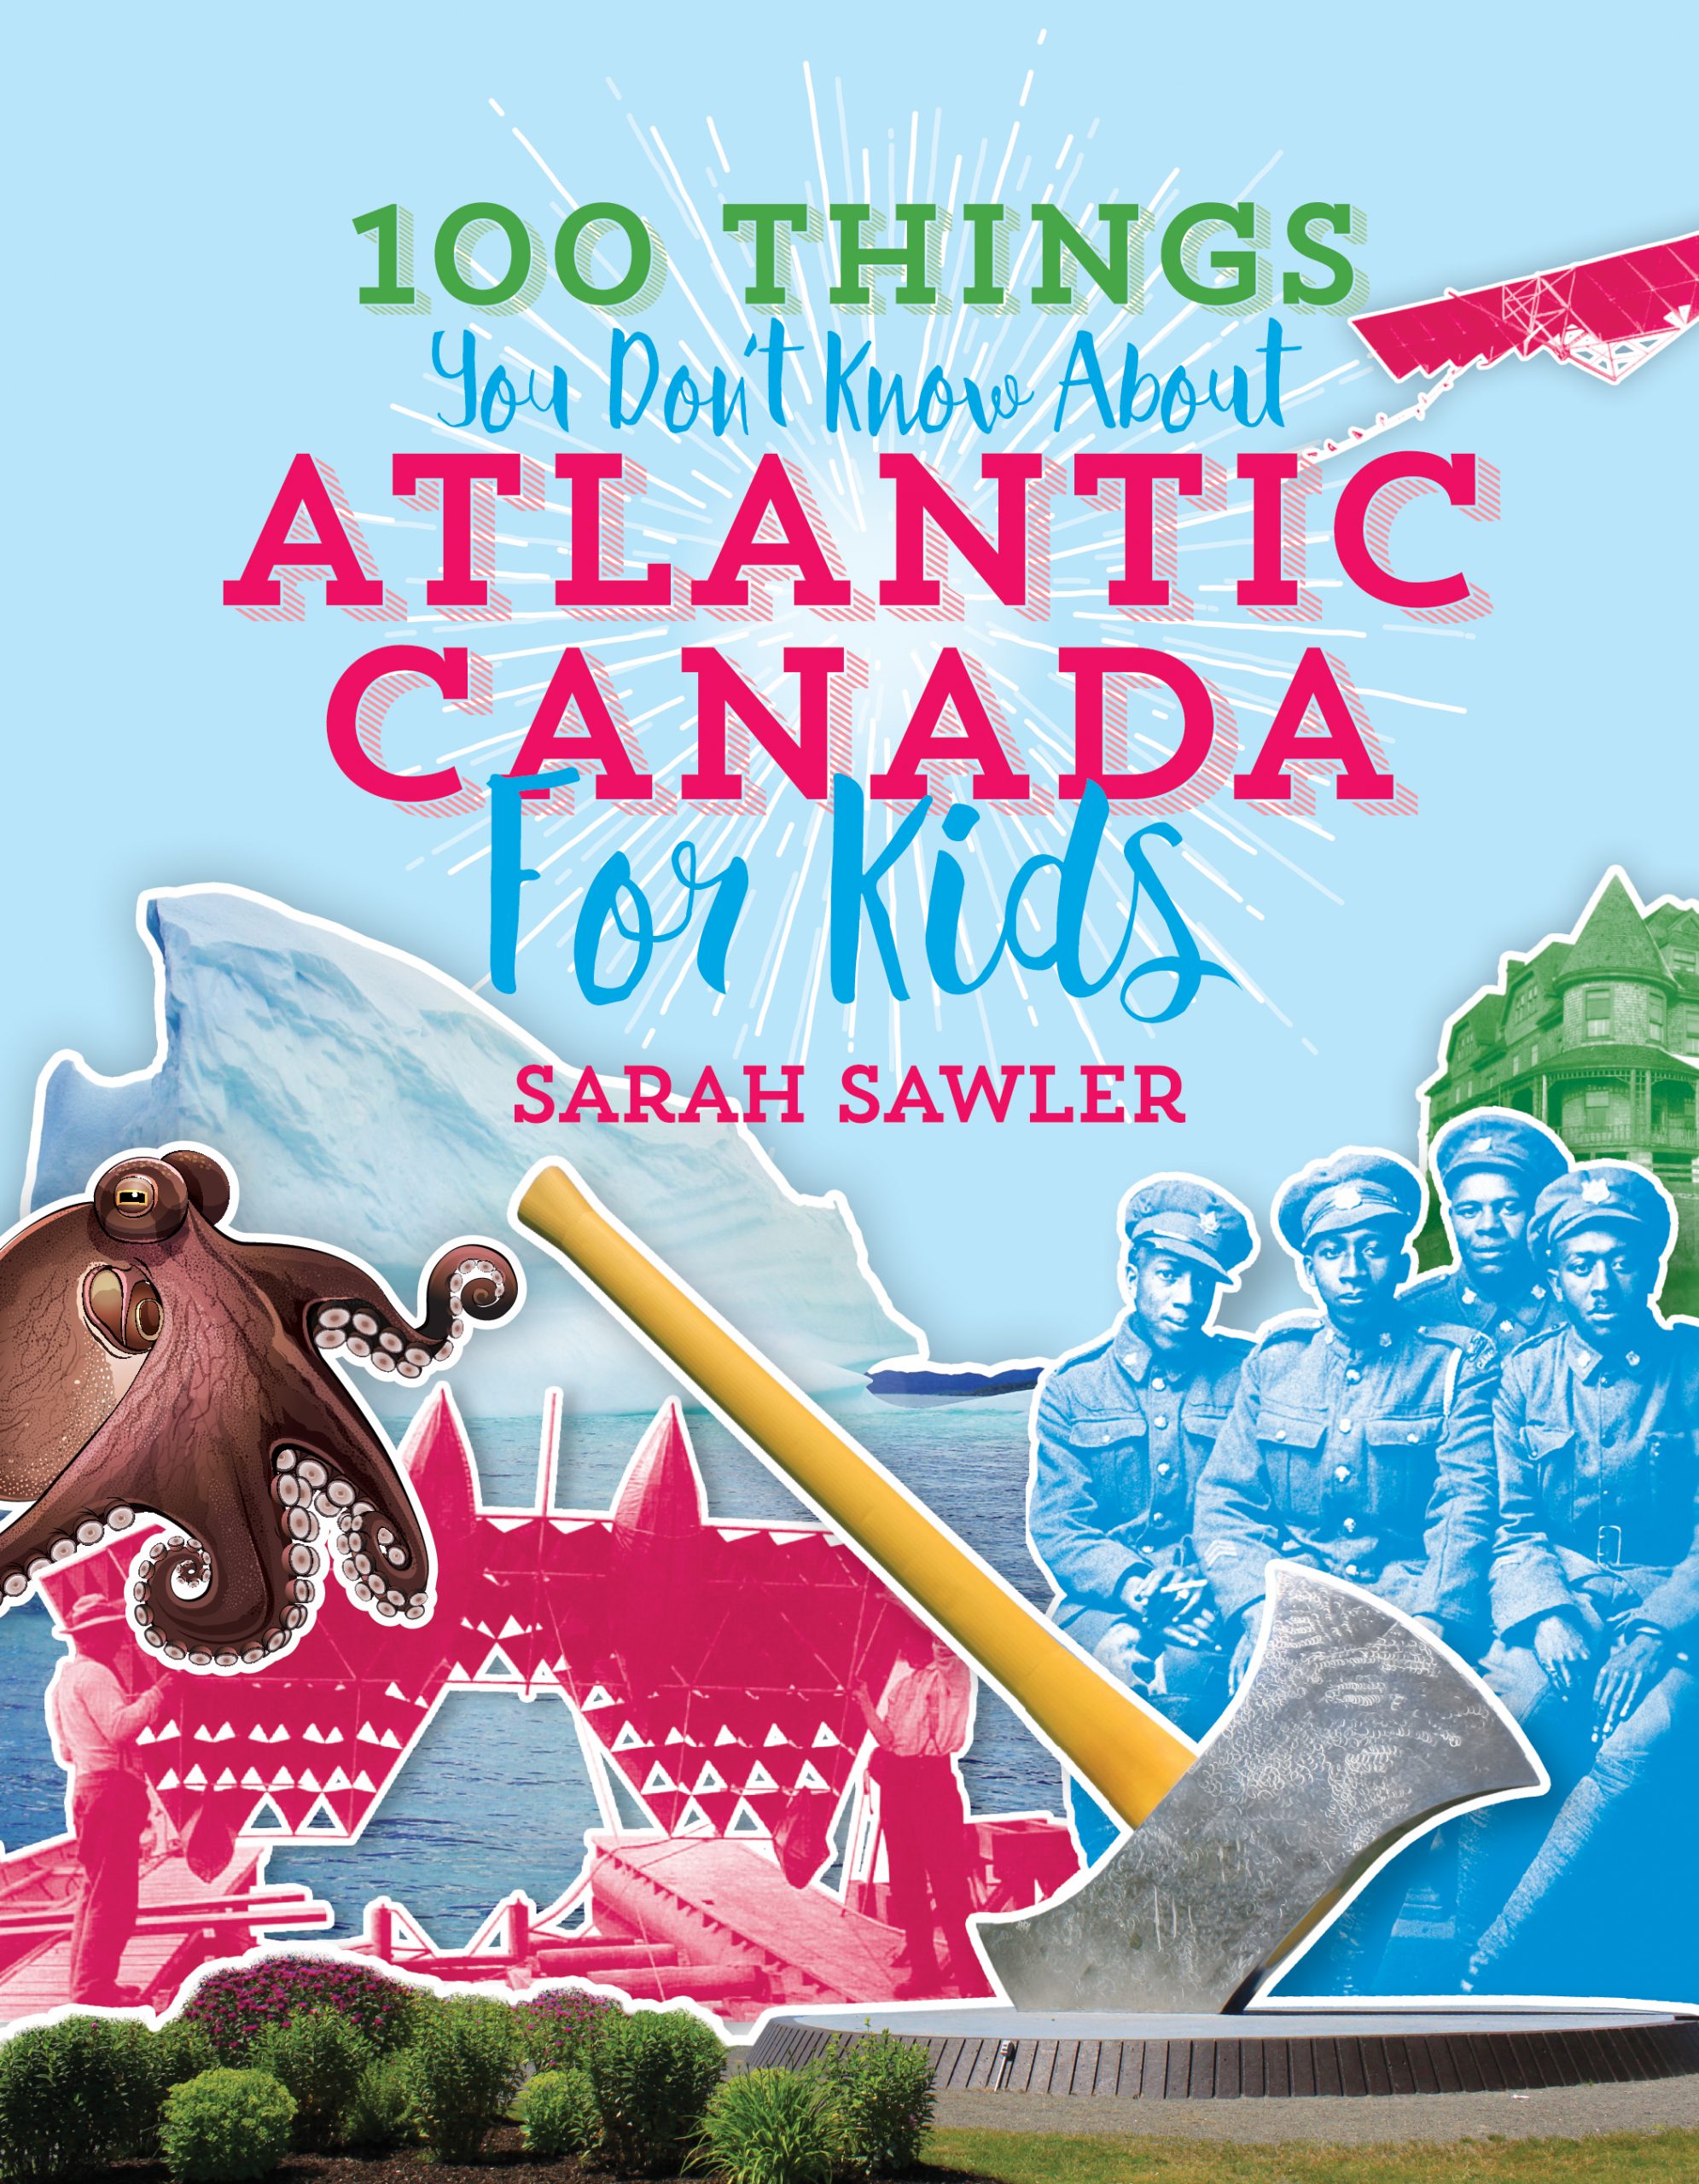 100 Things you don't know about Atlantic Canada for kids by Sarah Sawlor